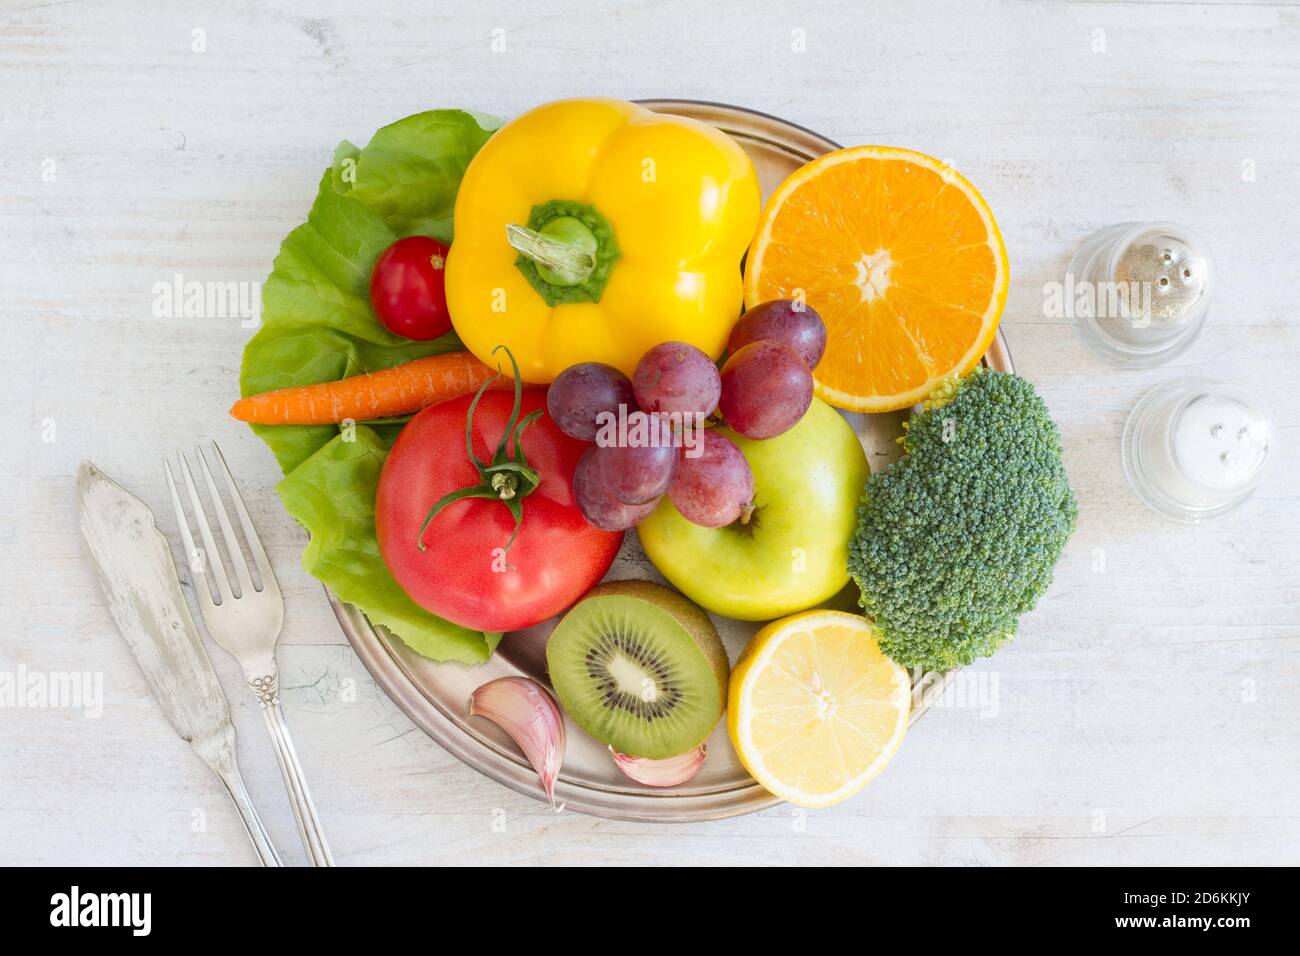 Plate full of fruits and vegetables, cutlery, spices. Healthy meal concept Stock Photo